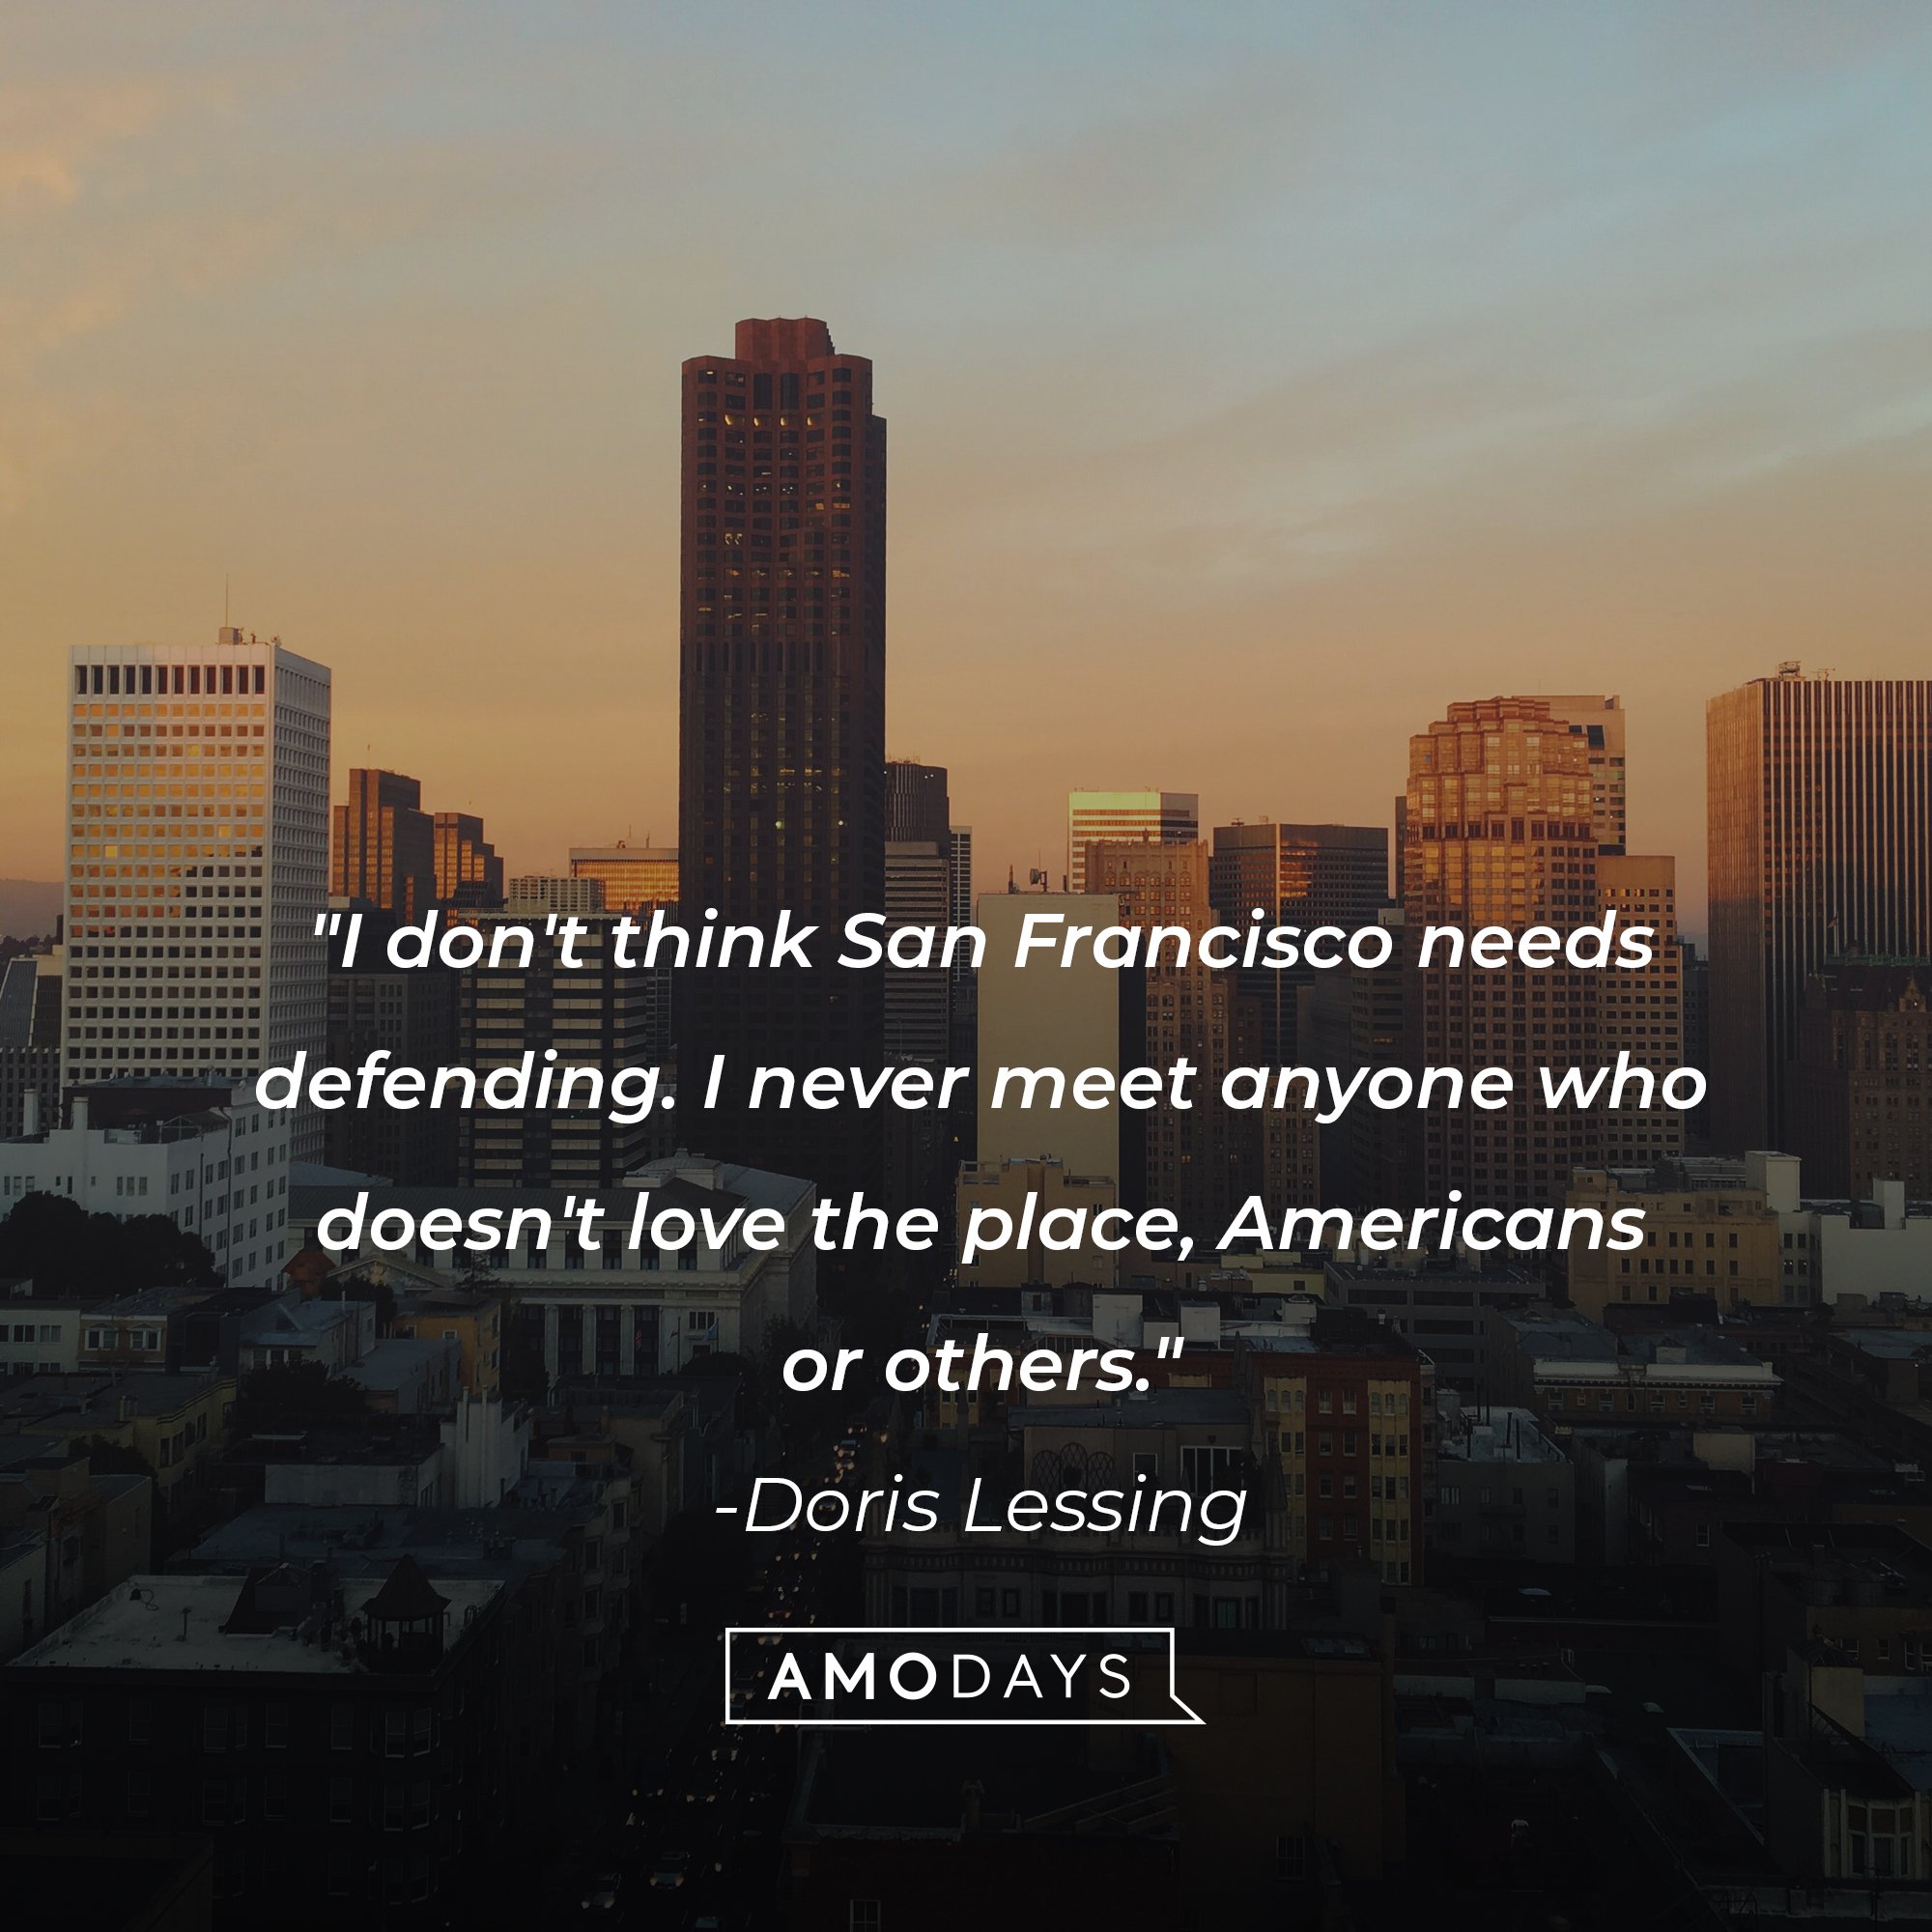 Doris Lessing’s quote: "I don't think San Francisco needs defending. I never meet anyone who doesn't love the place, Americans or others." | Image: AmoDays